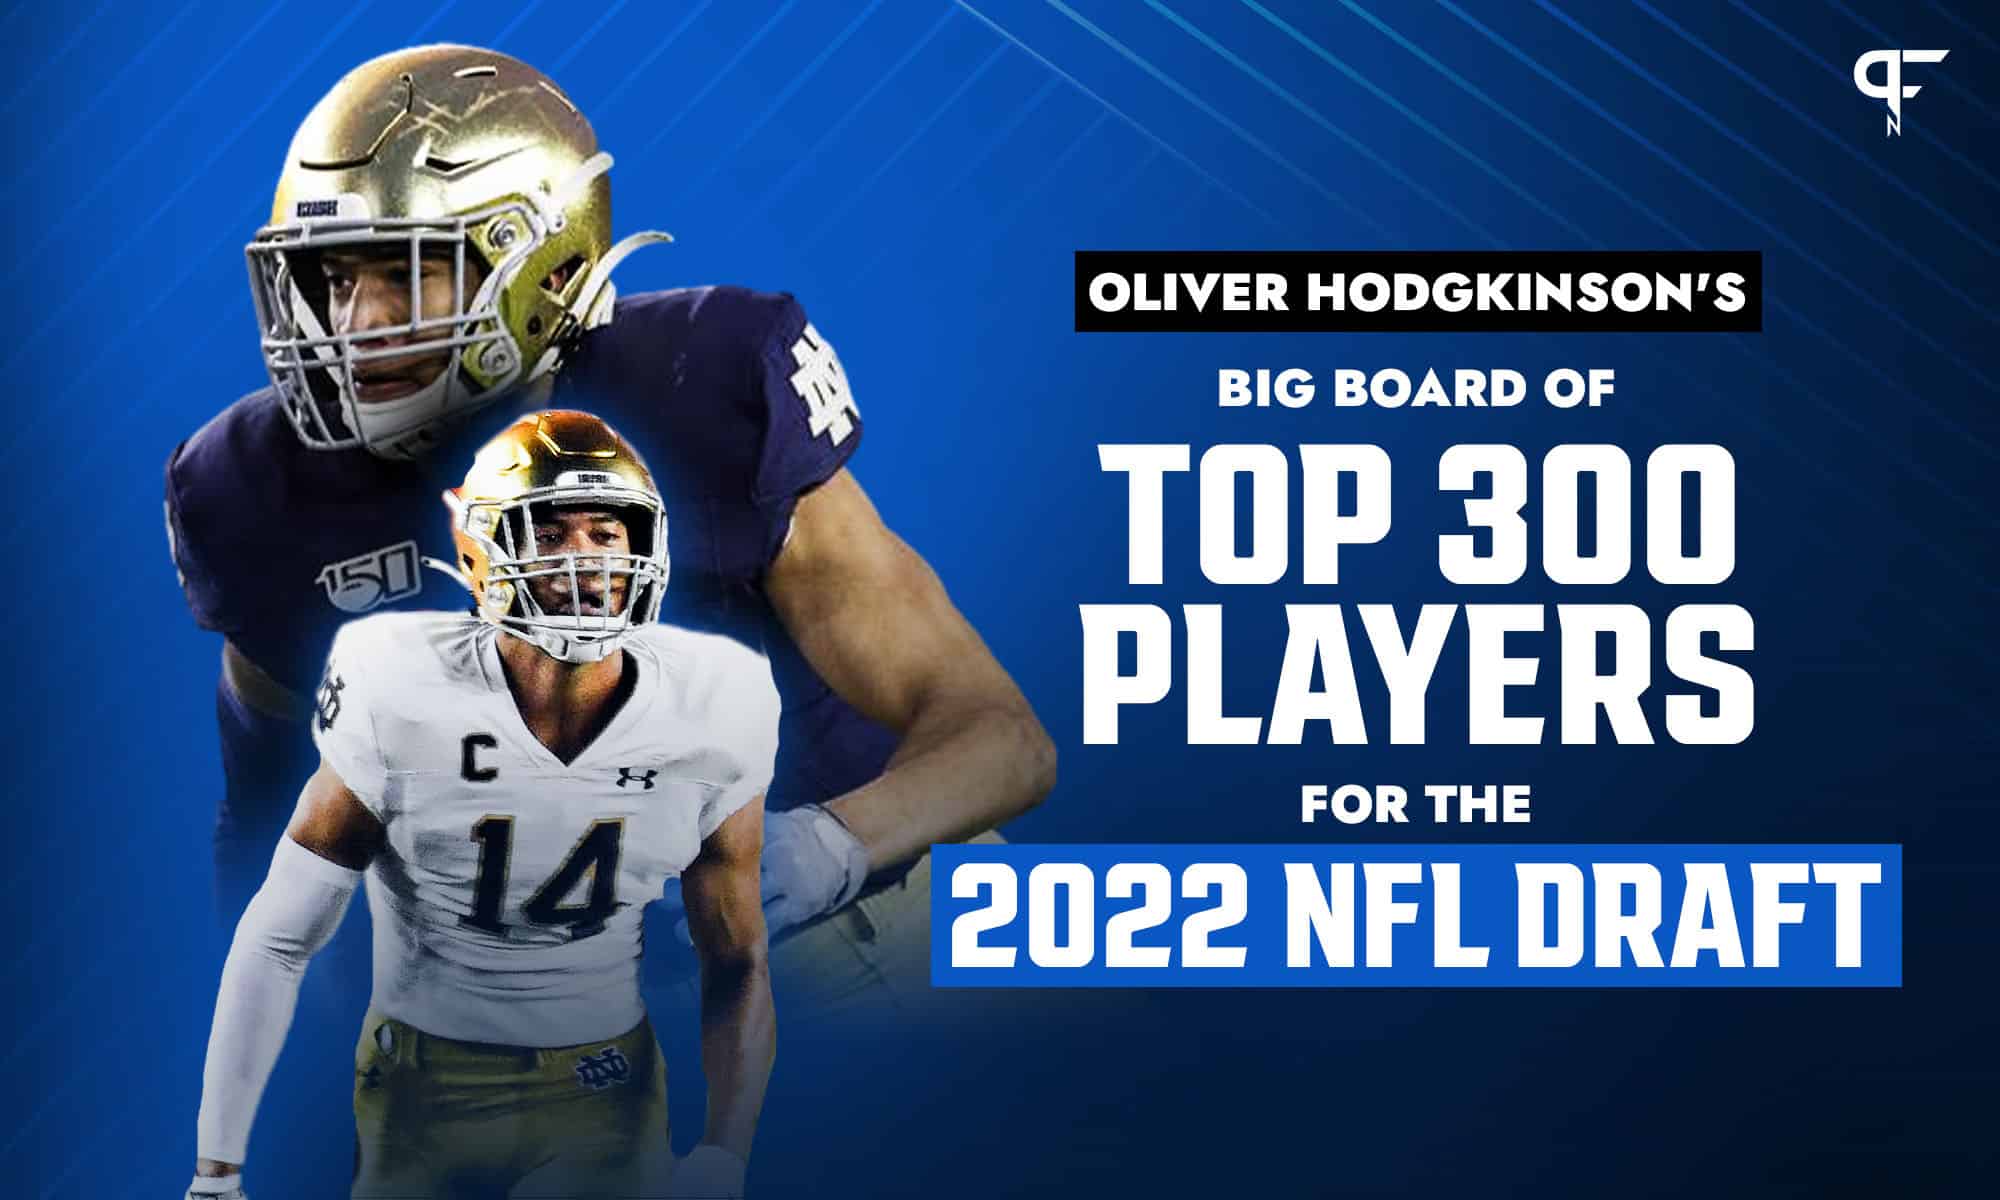 Oli Hodgkinson's Big Board of Top 300 Players for the 2022 NFL Draft